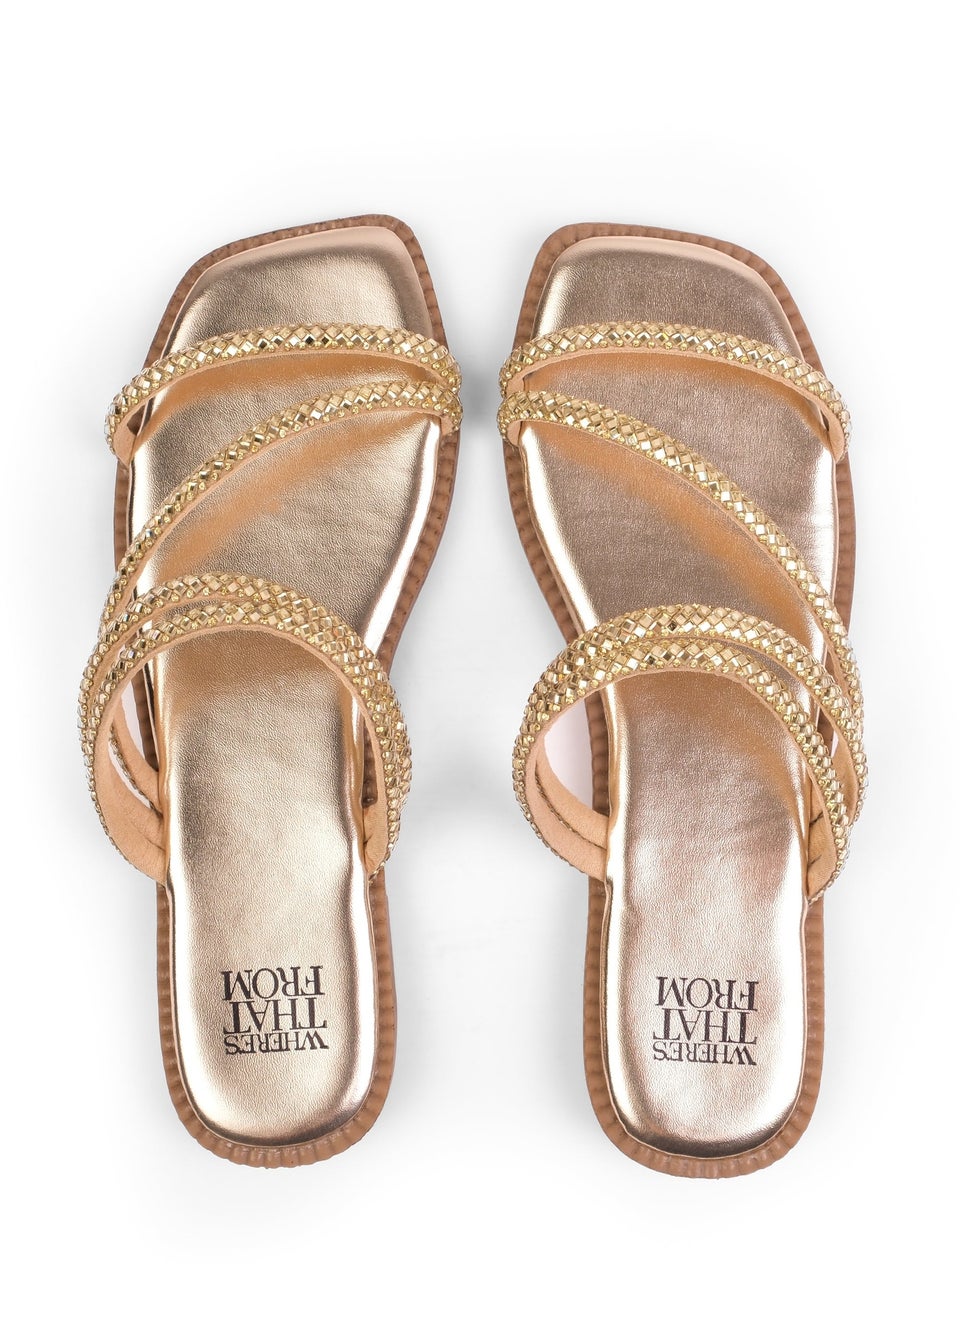 Where's That From Gold Dream Strappy Flat Sandals